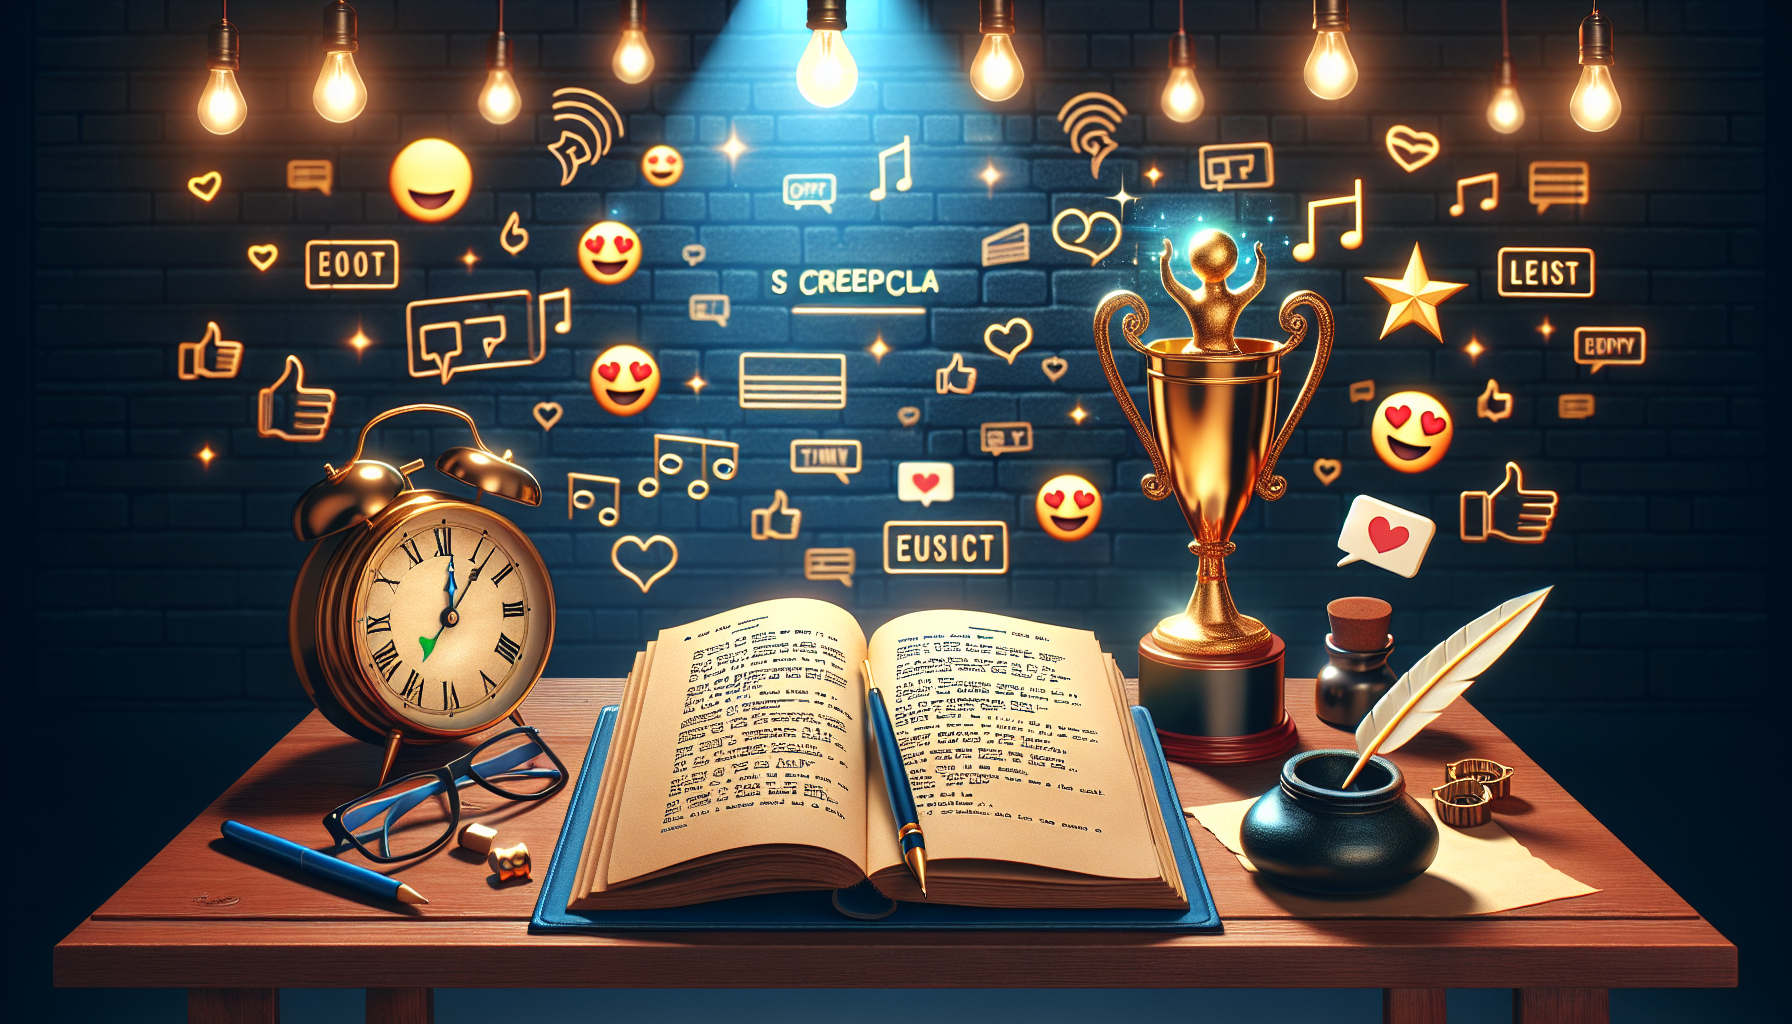 An illustration representing the concept of a successful script: an open screenplay book on a wooden desk with highlighted dialogue, a shining golden trophy representing victory nearby, a glowing quill with ink pot implying the process of creative writing, a ticking vintage clock symbolizing time and effort, and a cloud of positive emojis hovering above the setup showcasing audience love and acceptance. Set in the ambiance of a dimly lit room.